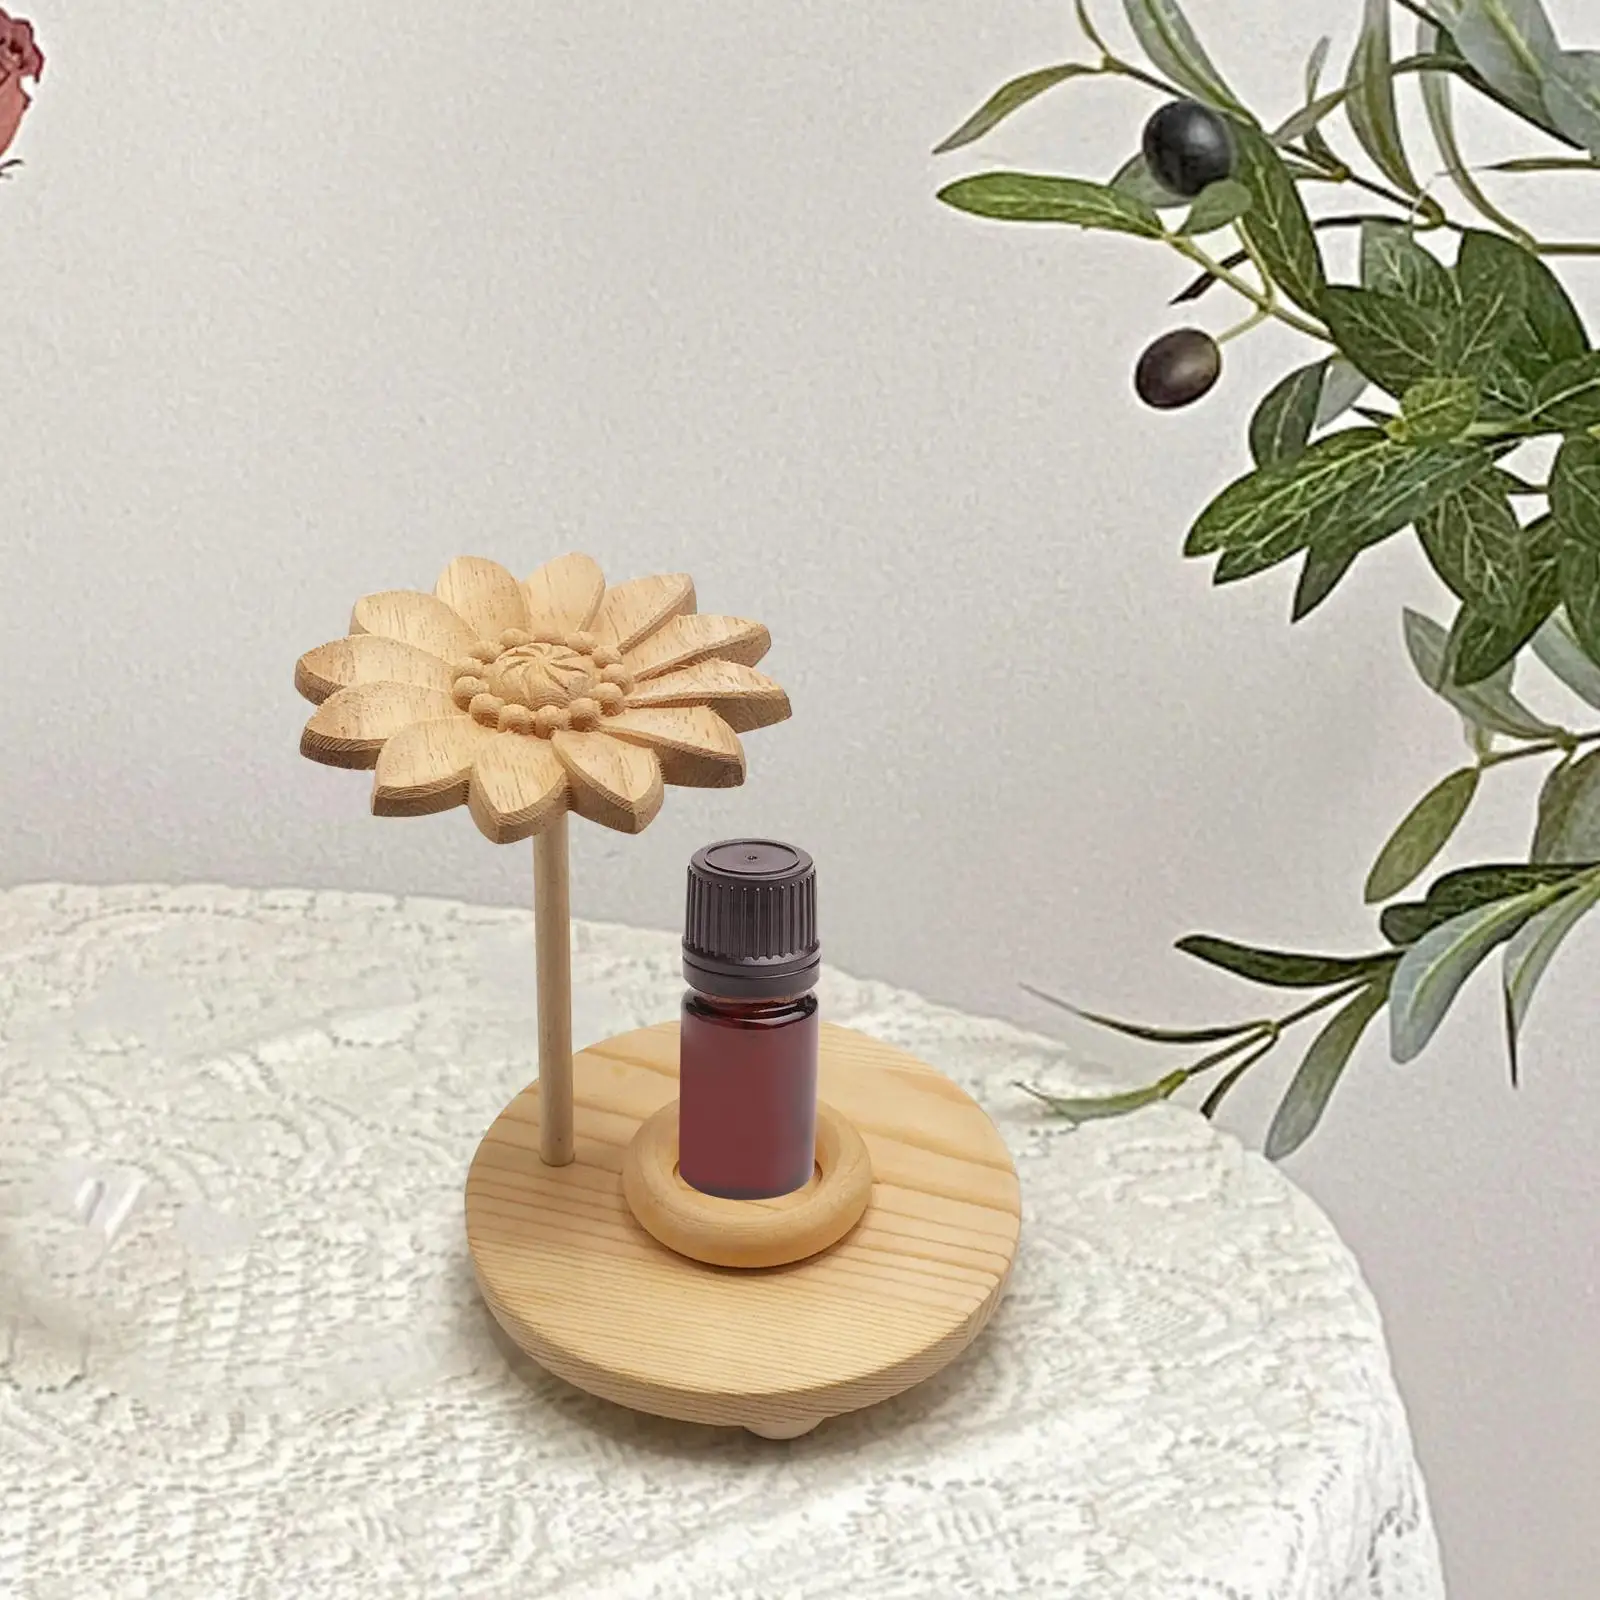 Wooden Essential Oil Diffuser Essential Oil Stand Minimalist Decor Handmade Decor Ornament for Bedroom Shop Vanity Table Home